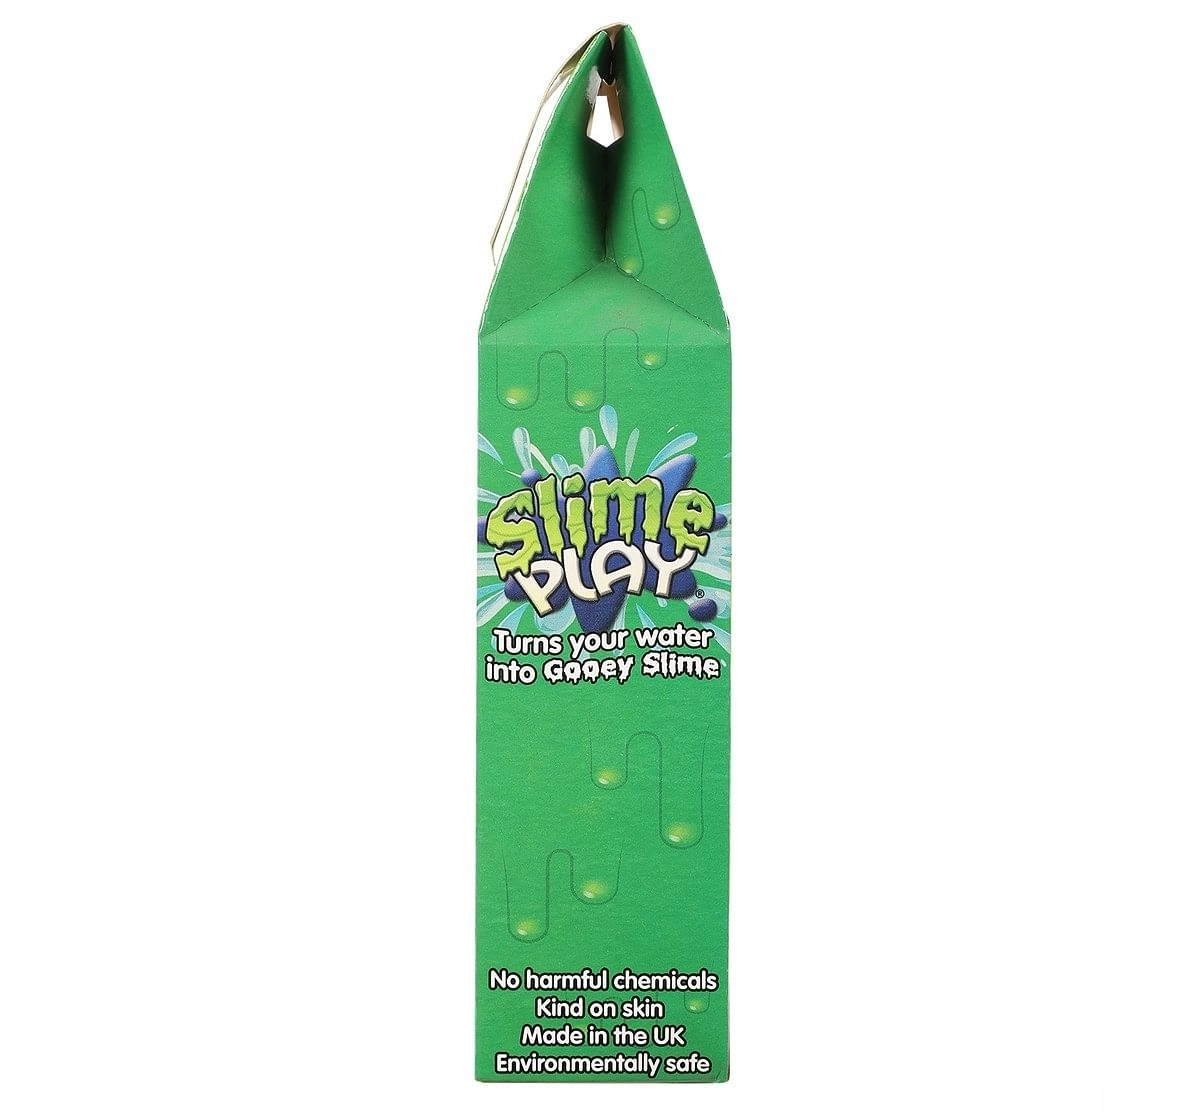 Simba Slime Play Goey Stainfree slime Multicolor 3Y+